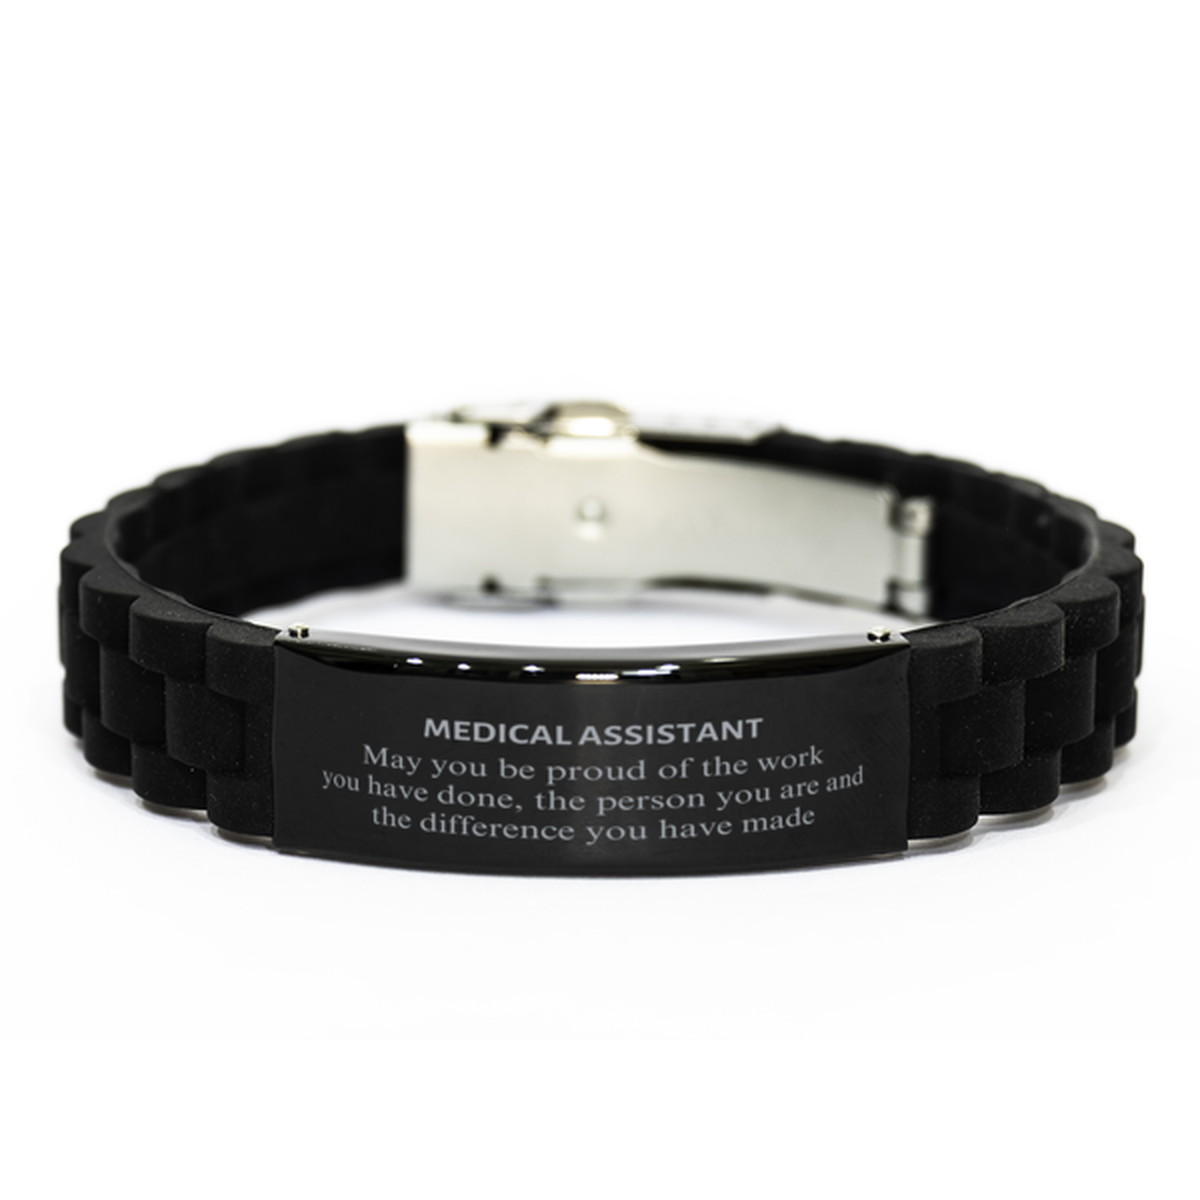 Medical Assistant May you be proud of the work you have done, Retirement Medical Assistant Black Glidelock Clasp Bracelet for Colleague Appreciation Gifts Amazing for Medical Assistant